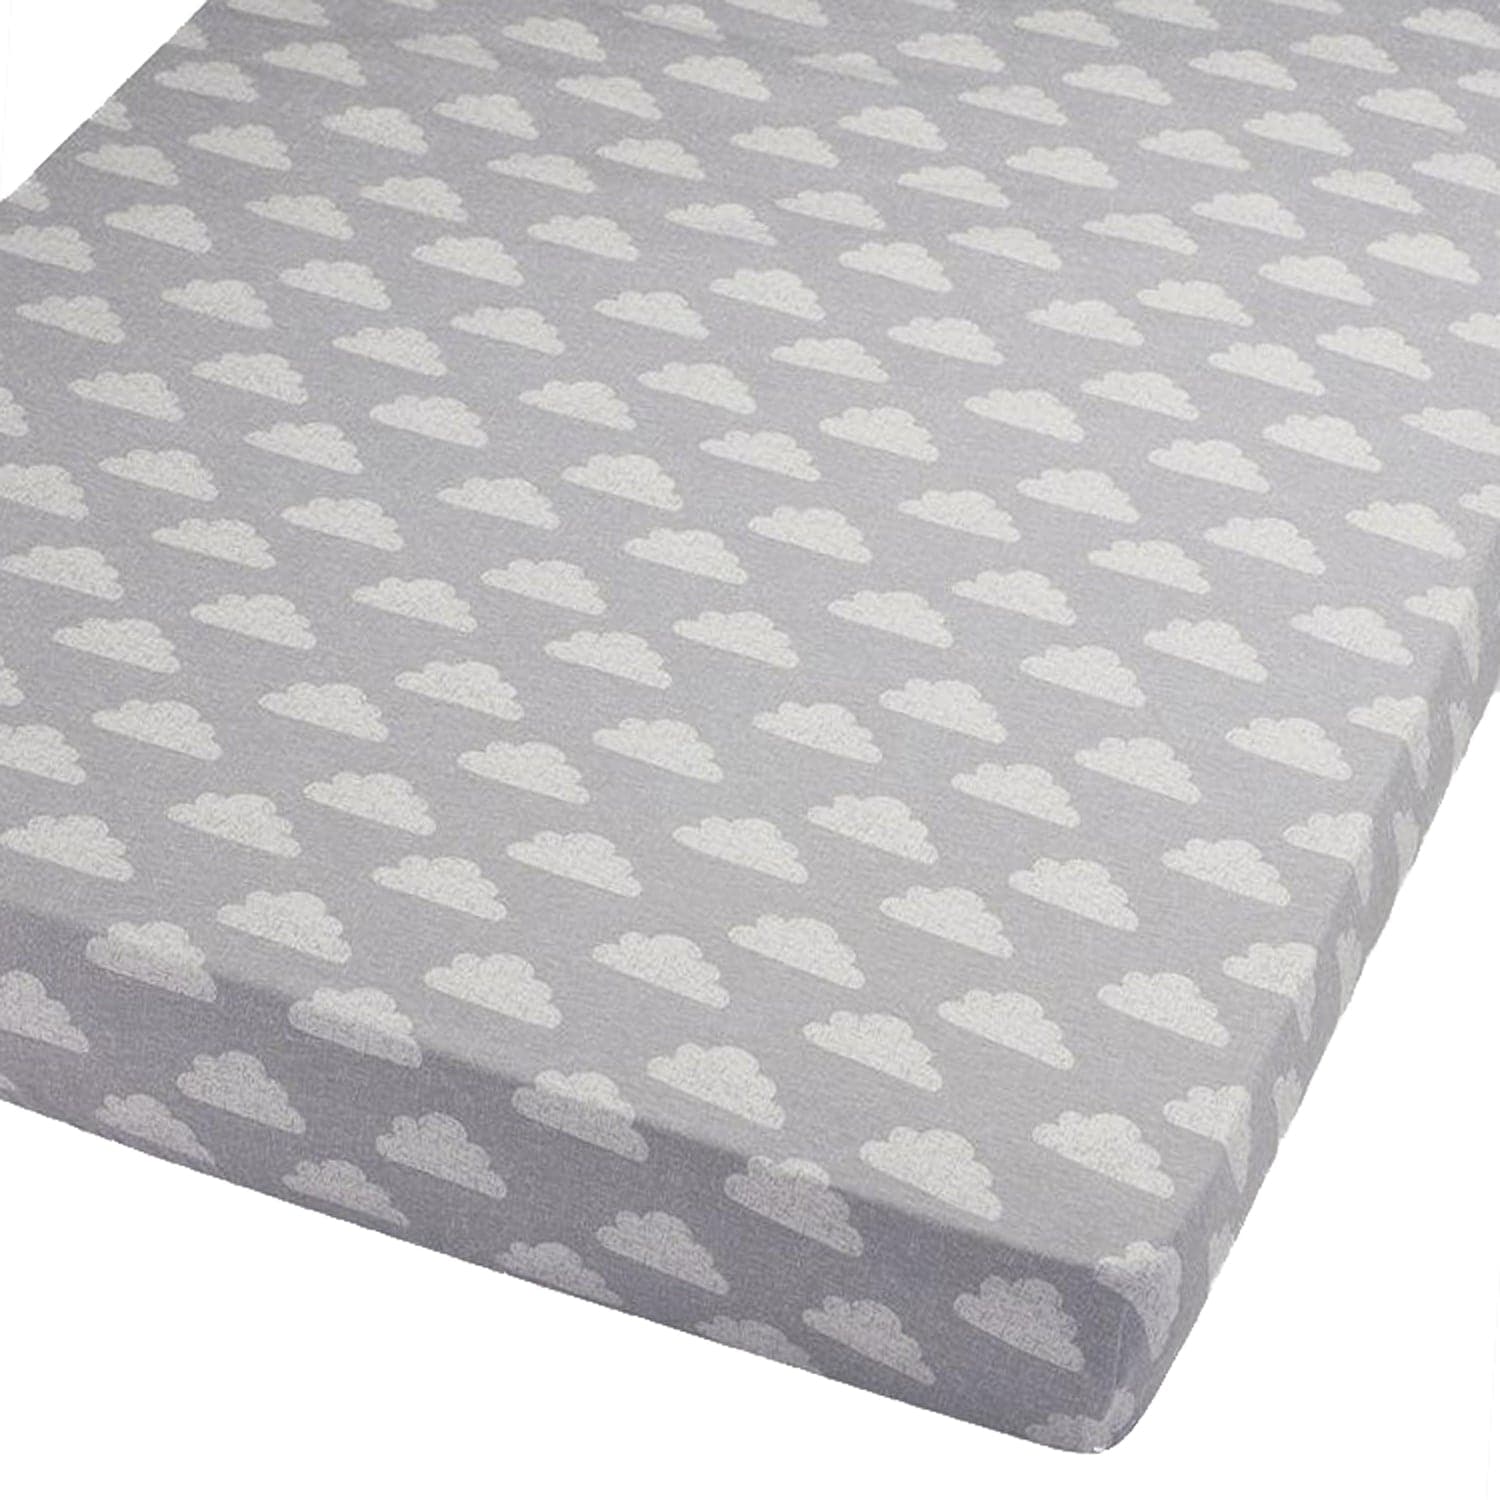 2x Cot Bed Fitted Sheets Compatible with Babylo Mattress 140x70cm - Clouds | For Your Little One